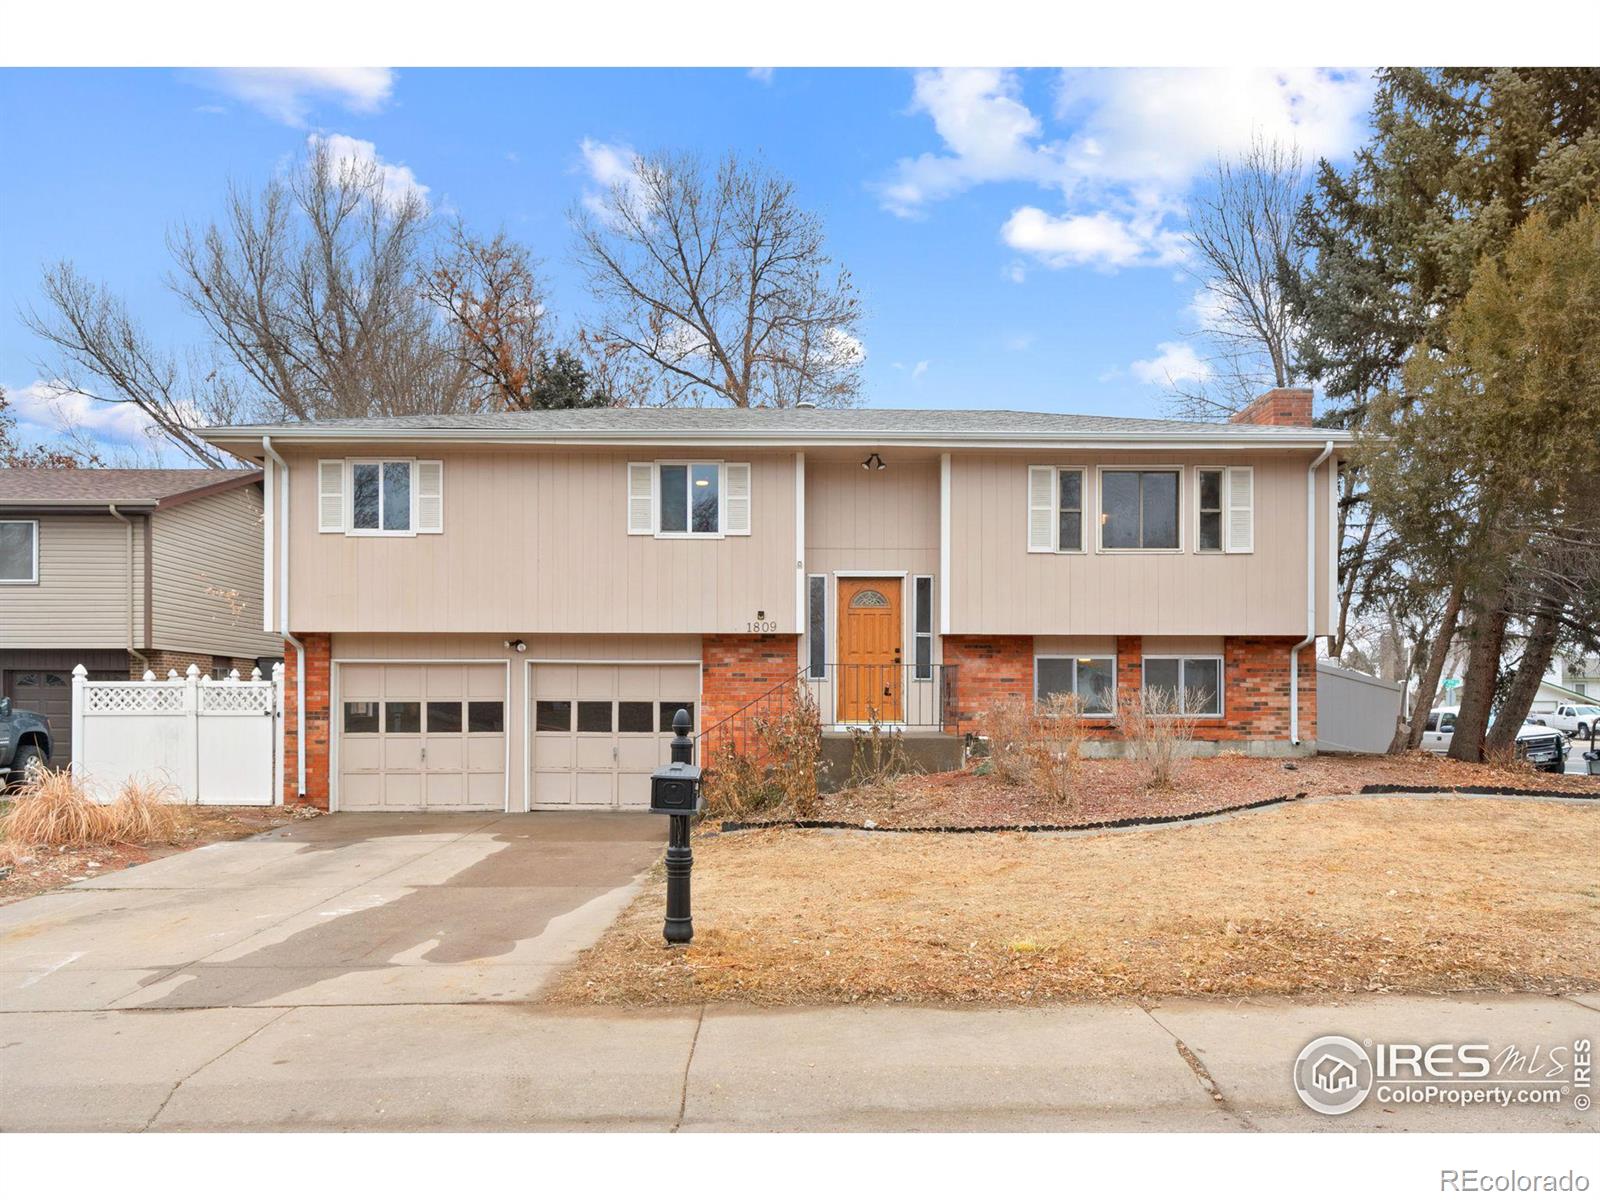 CMA Image for 2713 w 19th st rd,Greeley, Colorado